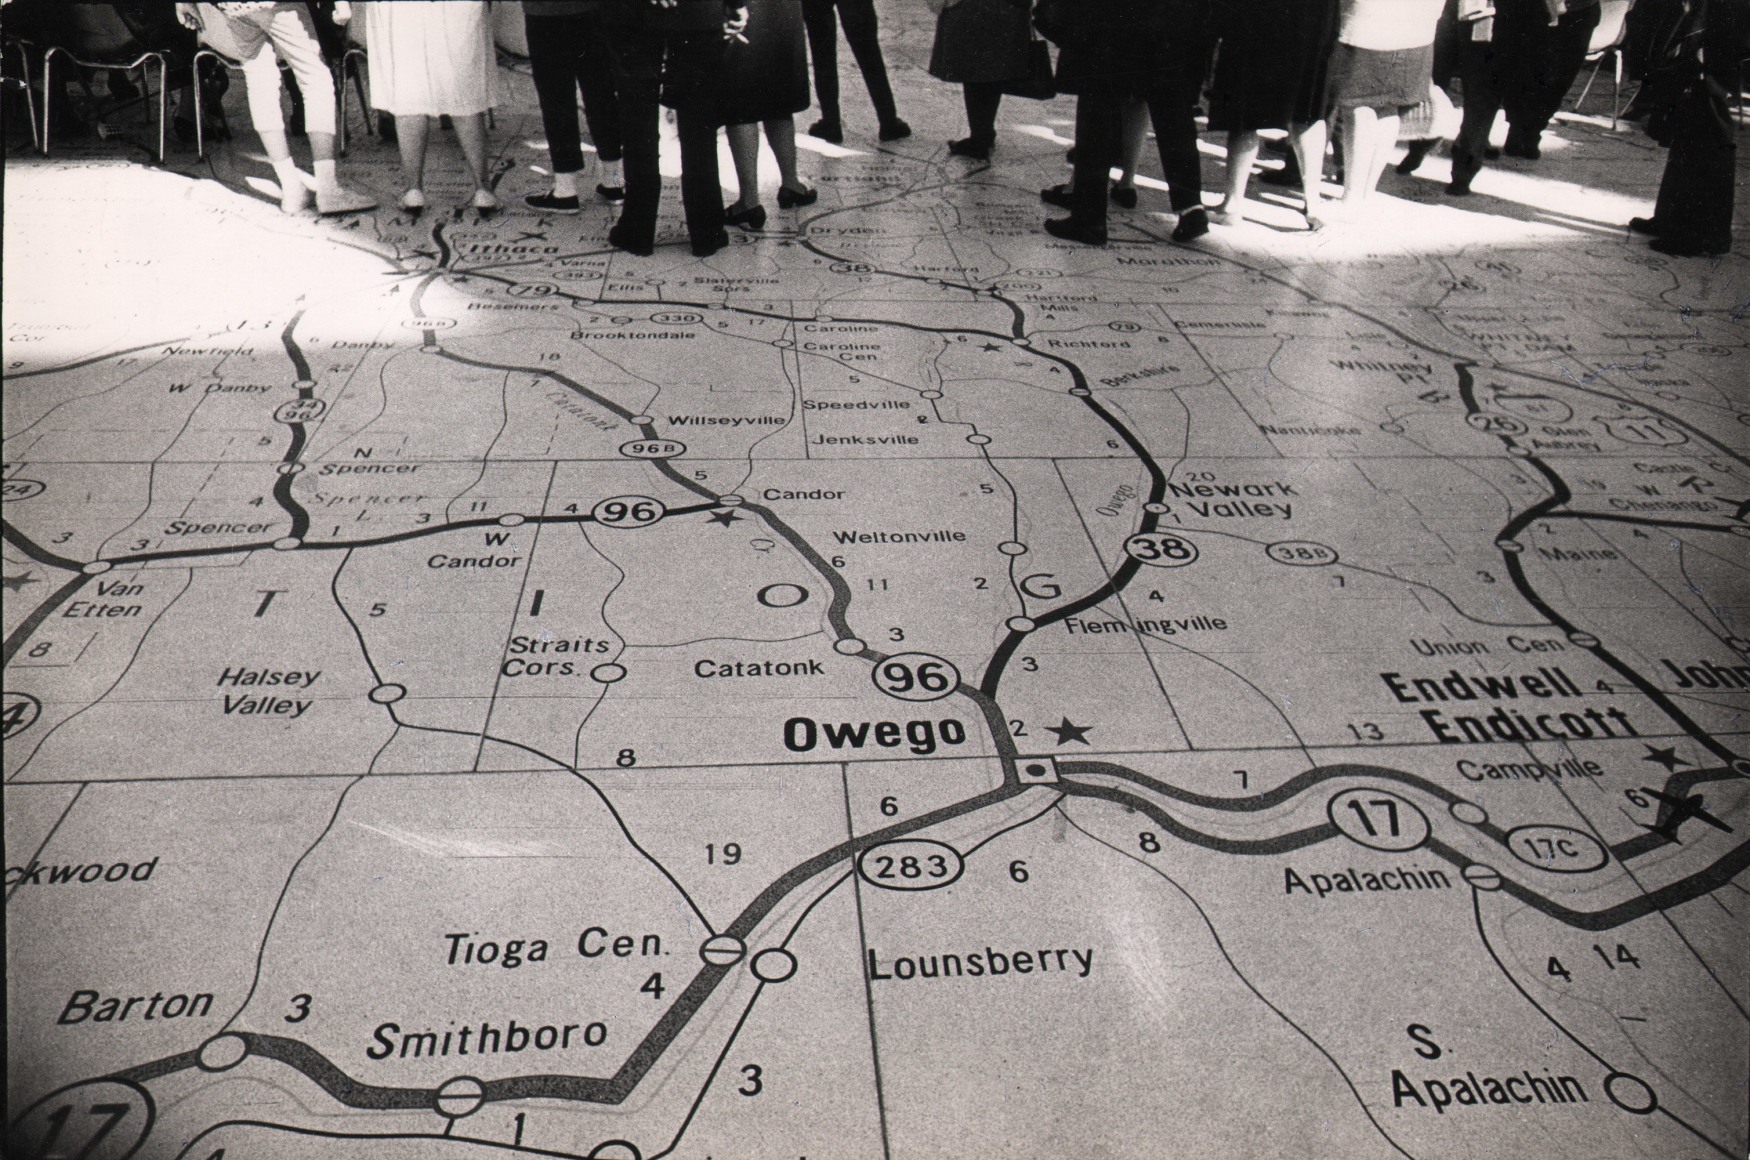 42. Jan Lukas, New York World Fair, ​1964. Looking down on a floor with a map of New York State on it. The lower bodies of figures are visible at the top of the frame.